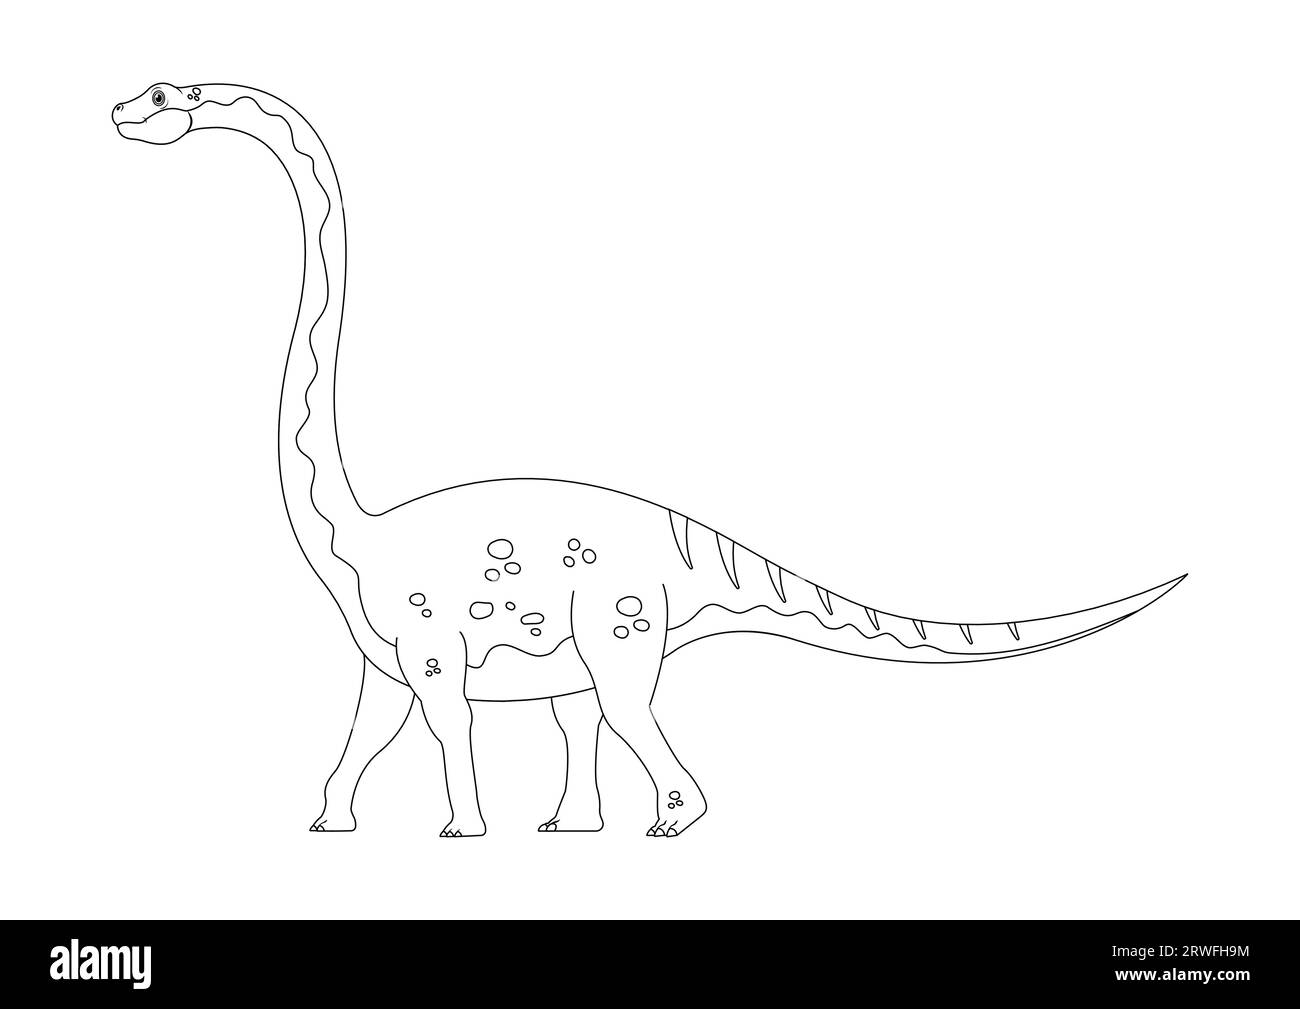 Black and White Omeisaurus Dinosaur Cartoon Character Vector. Coloring Page of a Omeisaurus Dinosaur Stock Vector